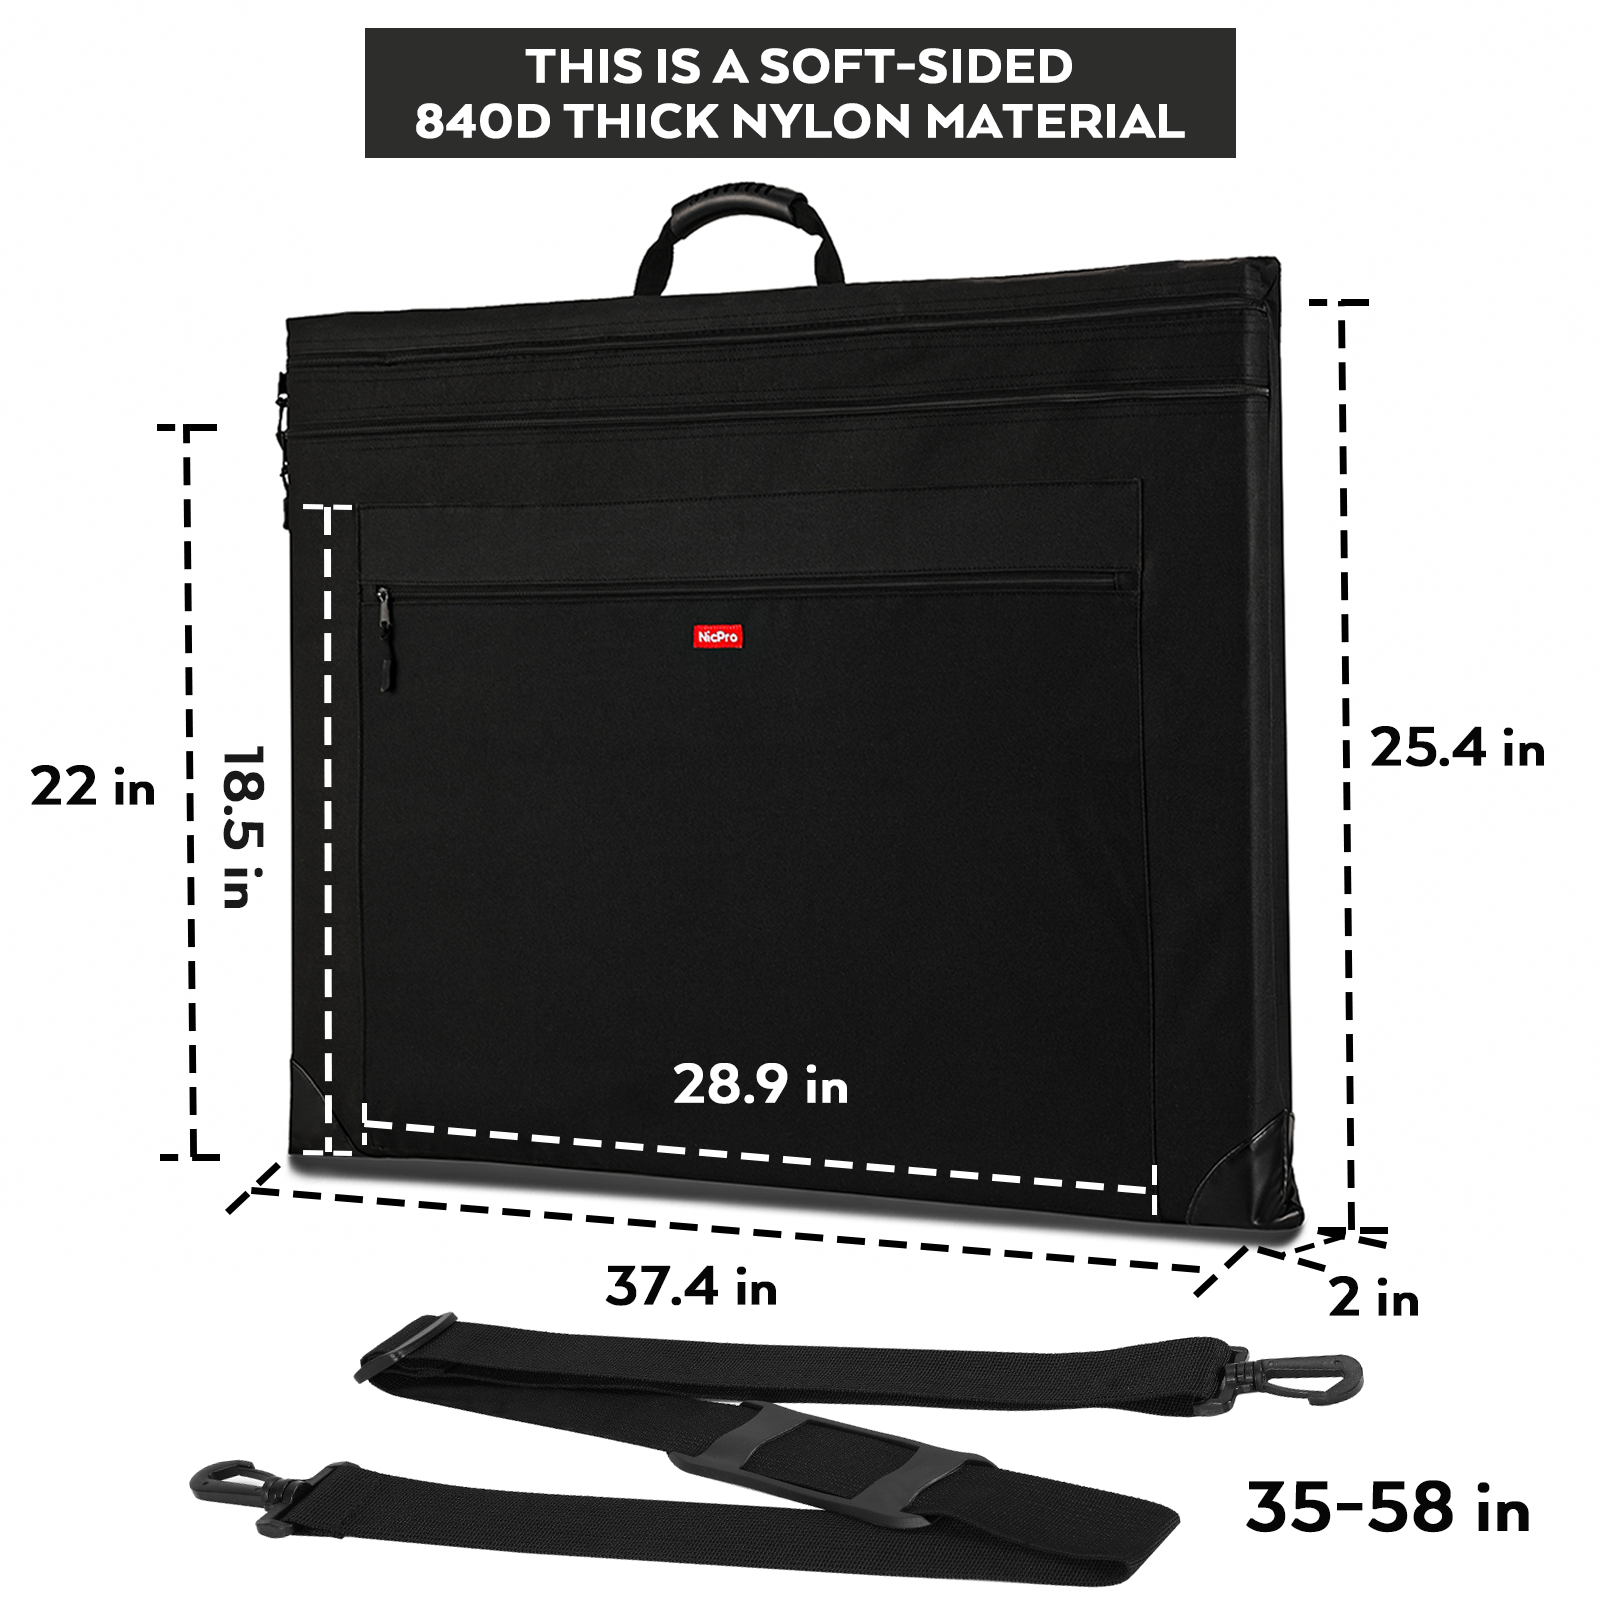  Large Size Art Portfolio Bag with Nylon Shoulder, 24 x 36  inches Light Weight Poster Storage Bag Board Holder with Handle and Zipper  for Poster, Sketching and Drawing : Arts, Crafts